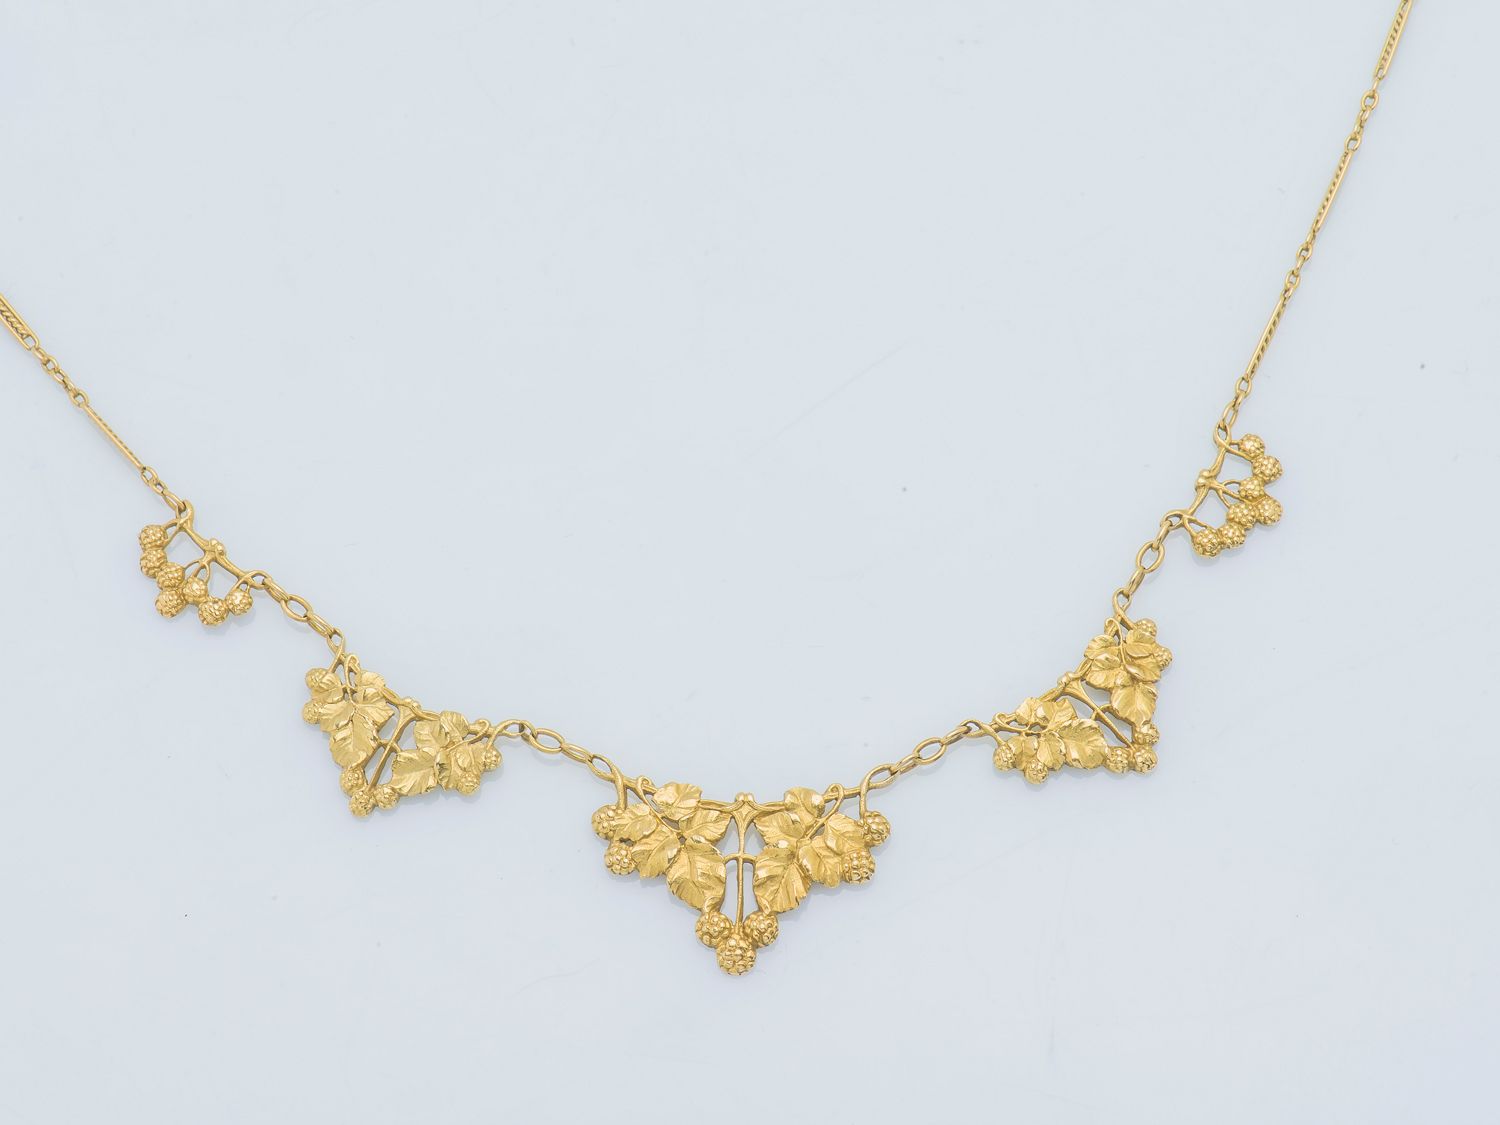 Null Necklace collar in 18K yellow gold (750 ‰) decorated with garlands of sligh&hellip;